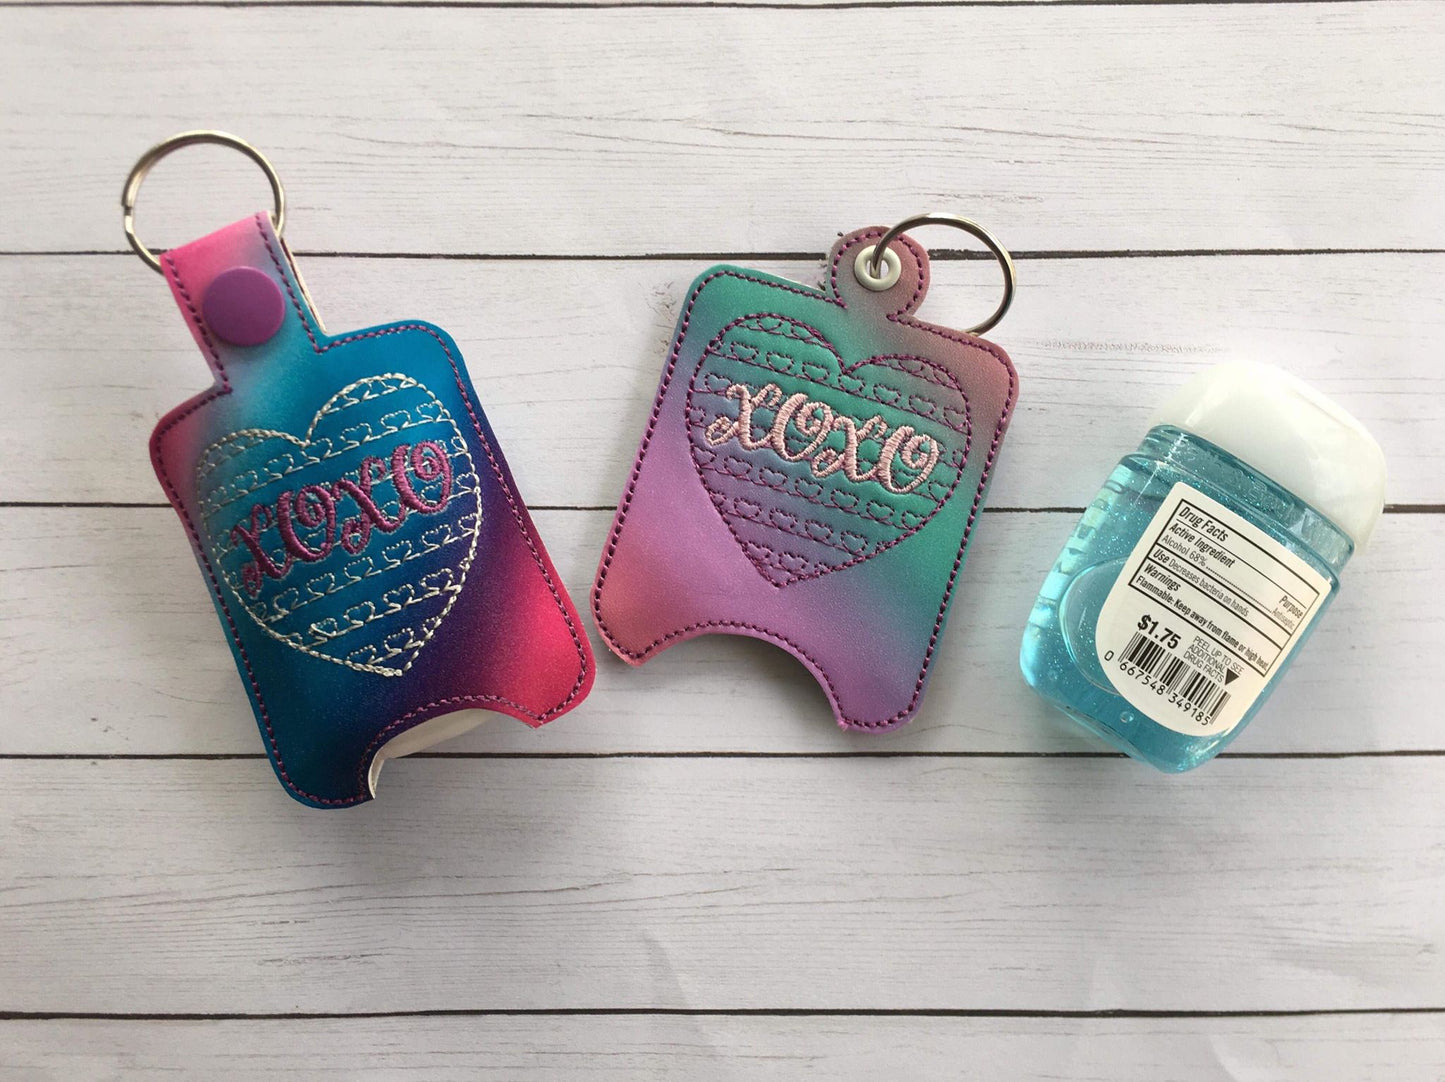 XOXO Heart Sanitizer Holders - Embroidery Design - DIGITAL Embroidery DESIGN